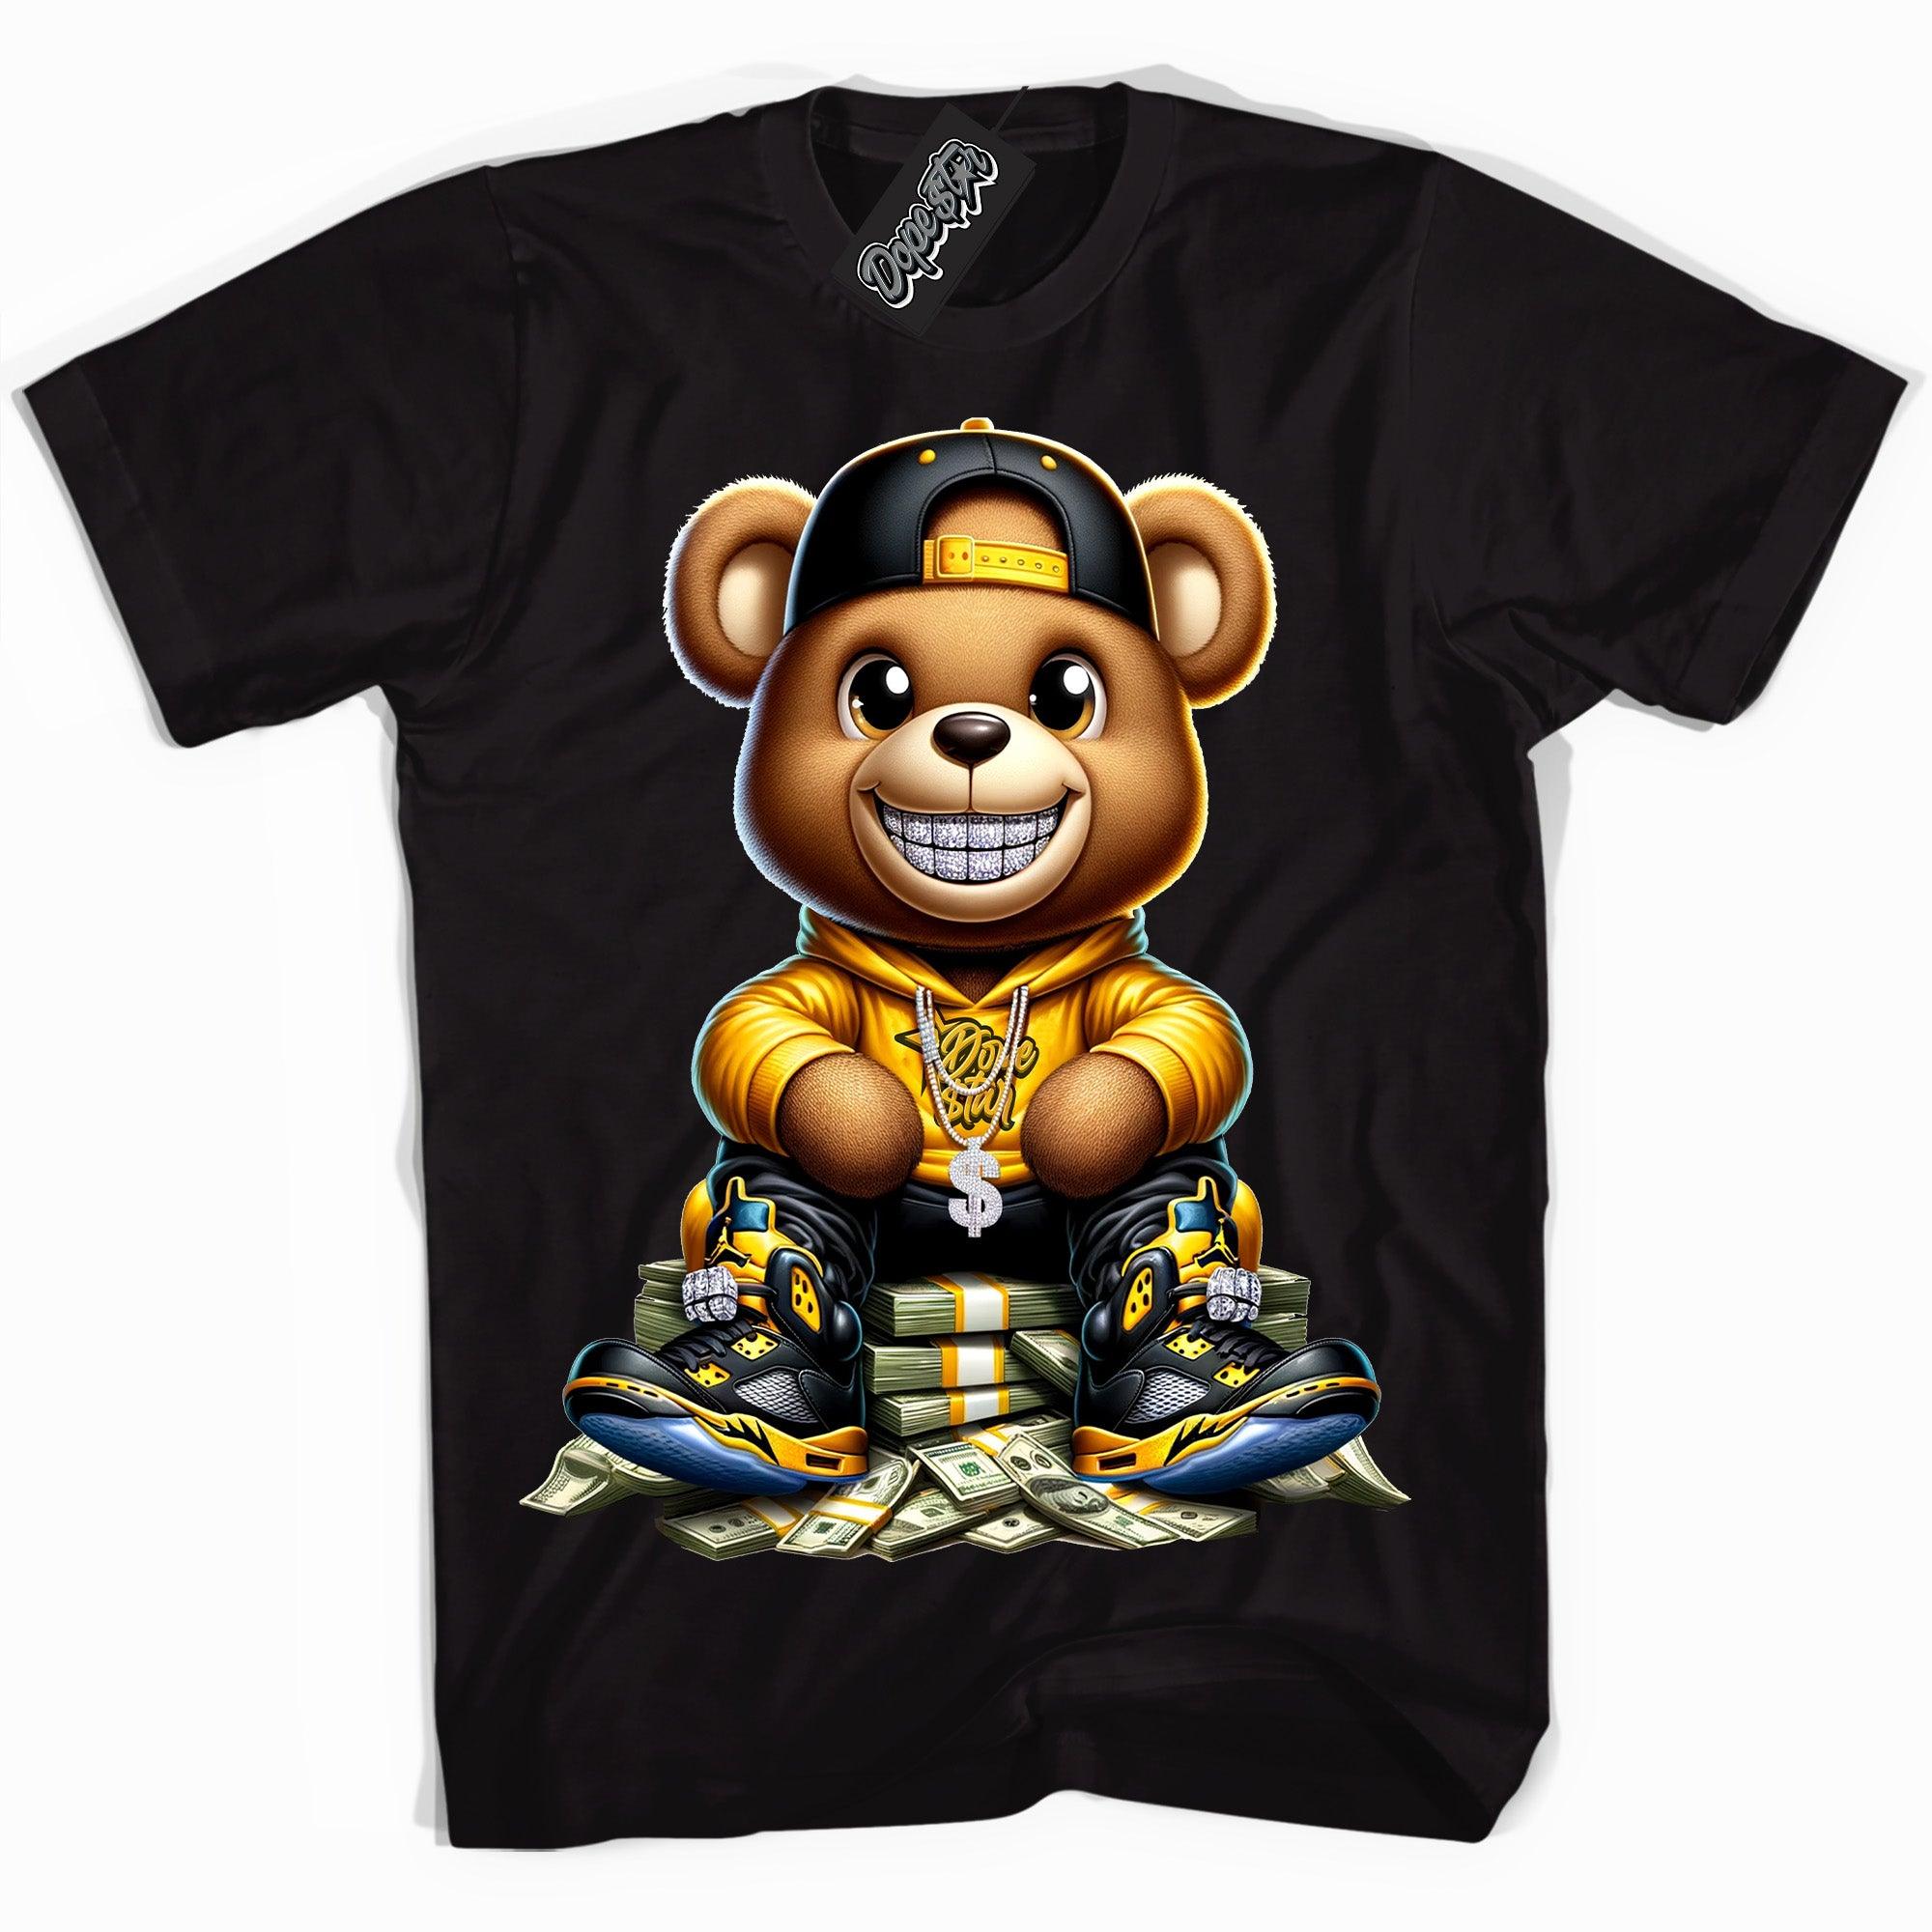 Cool Black graphic tee with “ Dope Star Bear ” print, that perfectly matches Air Jordan 12 BLACK TAXI sneakers